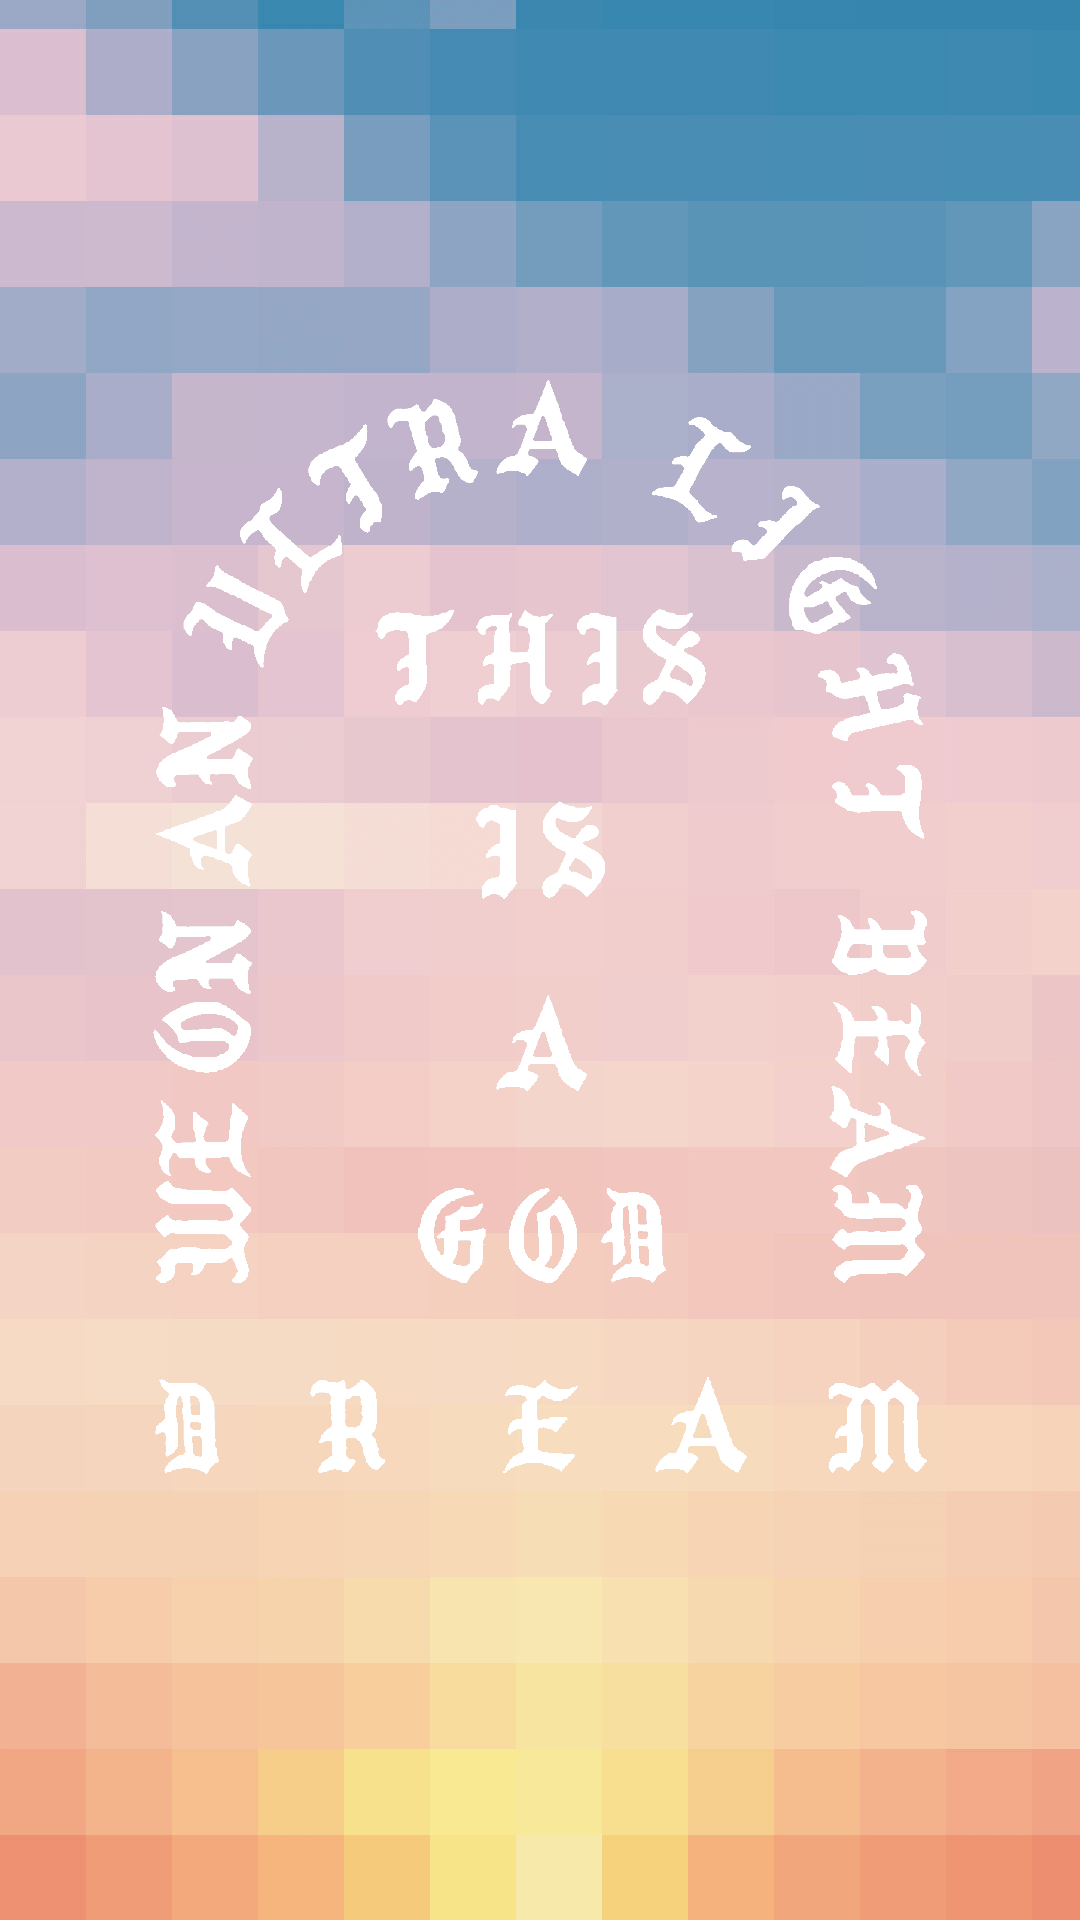 Can we start a collection of some dope Kanye wallpaper?, Kanye